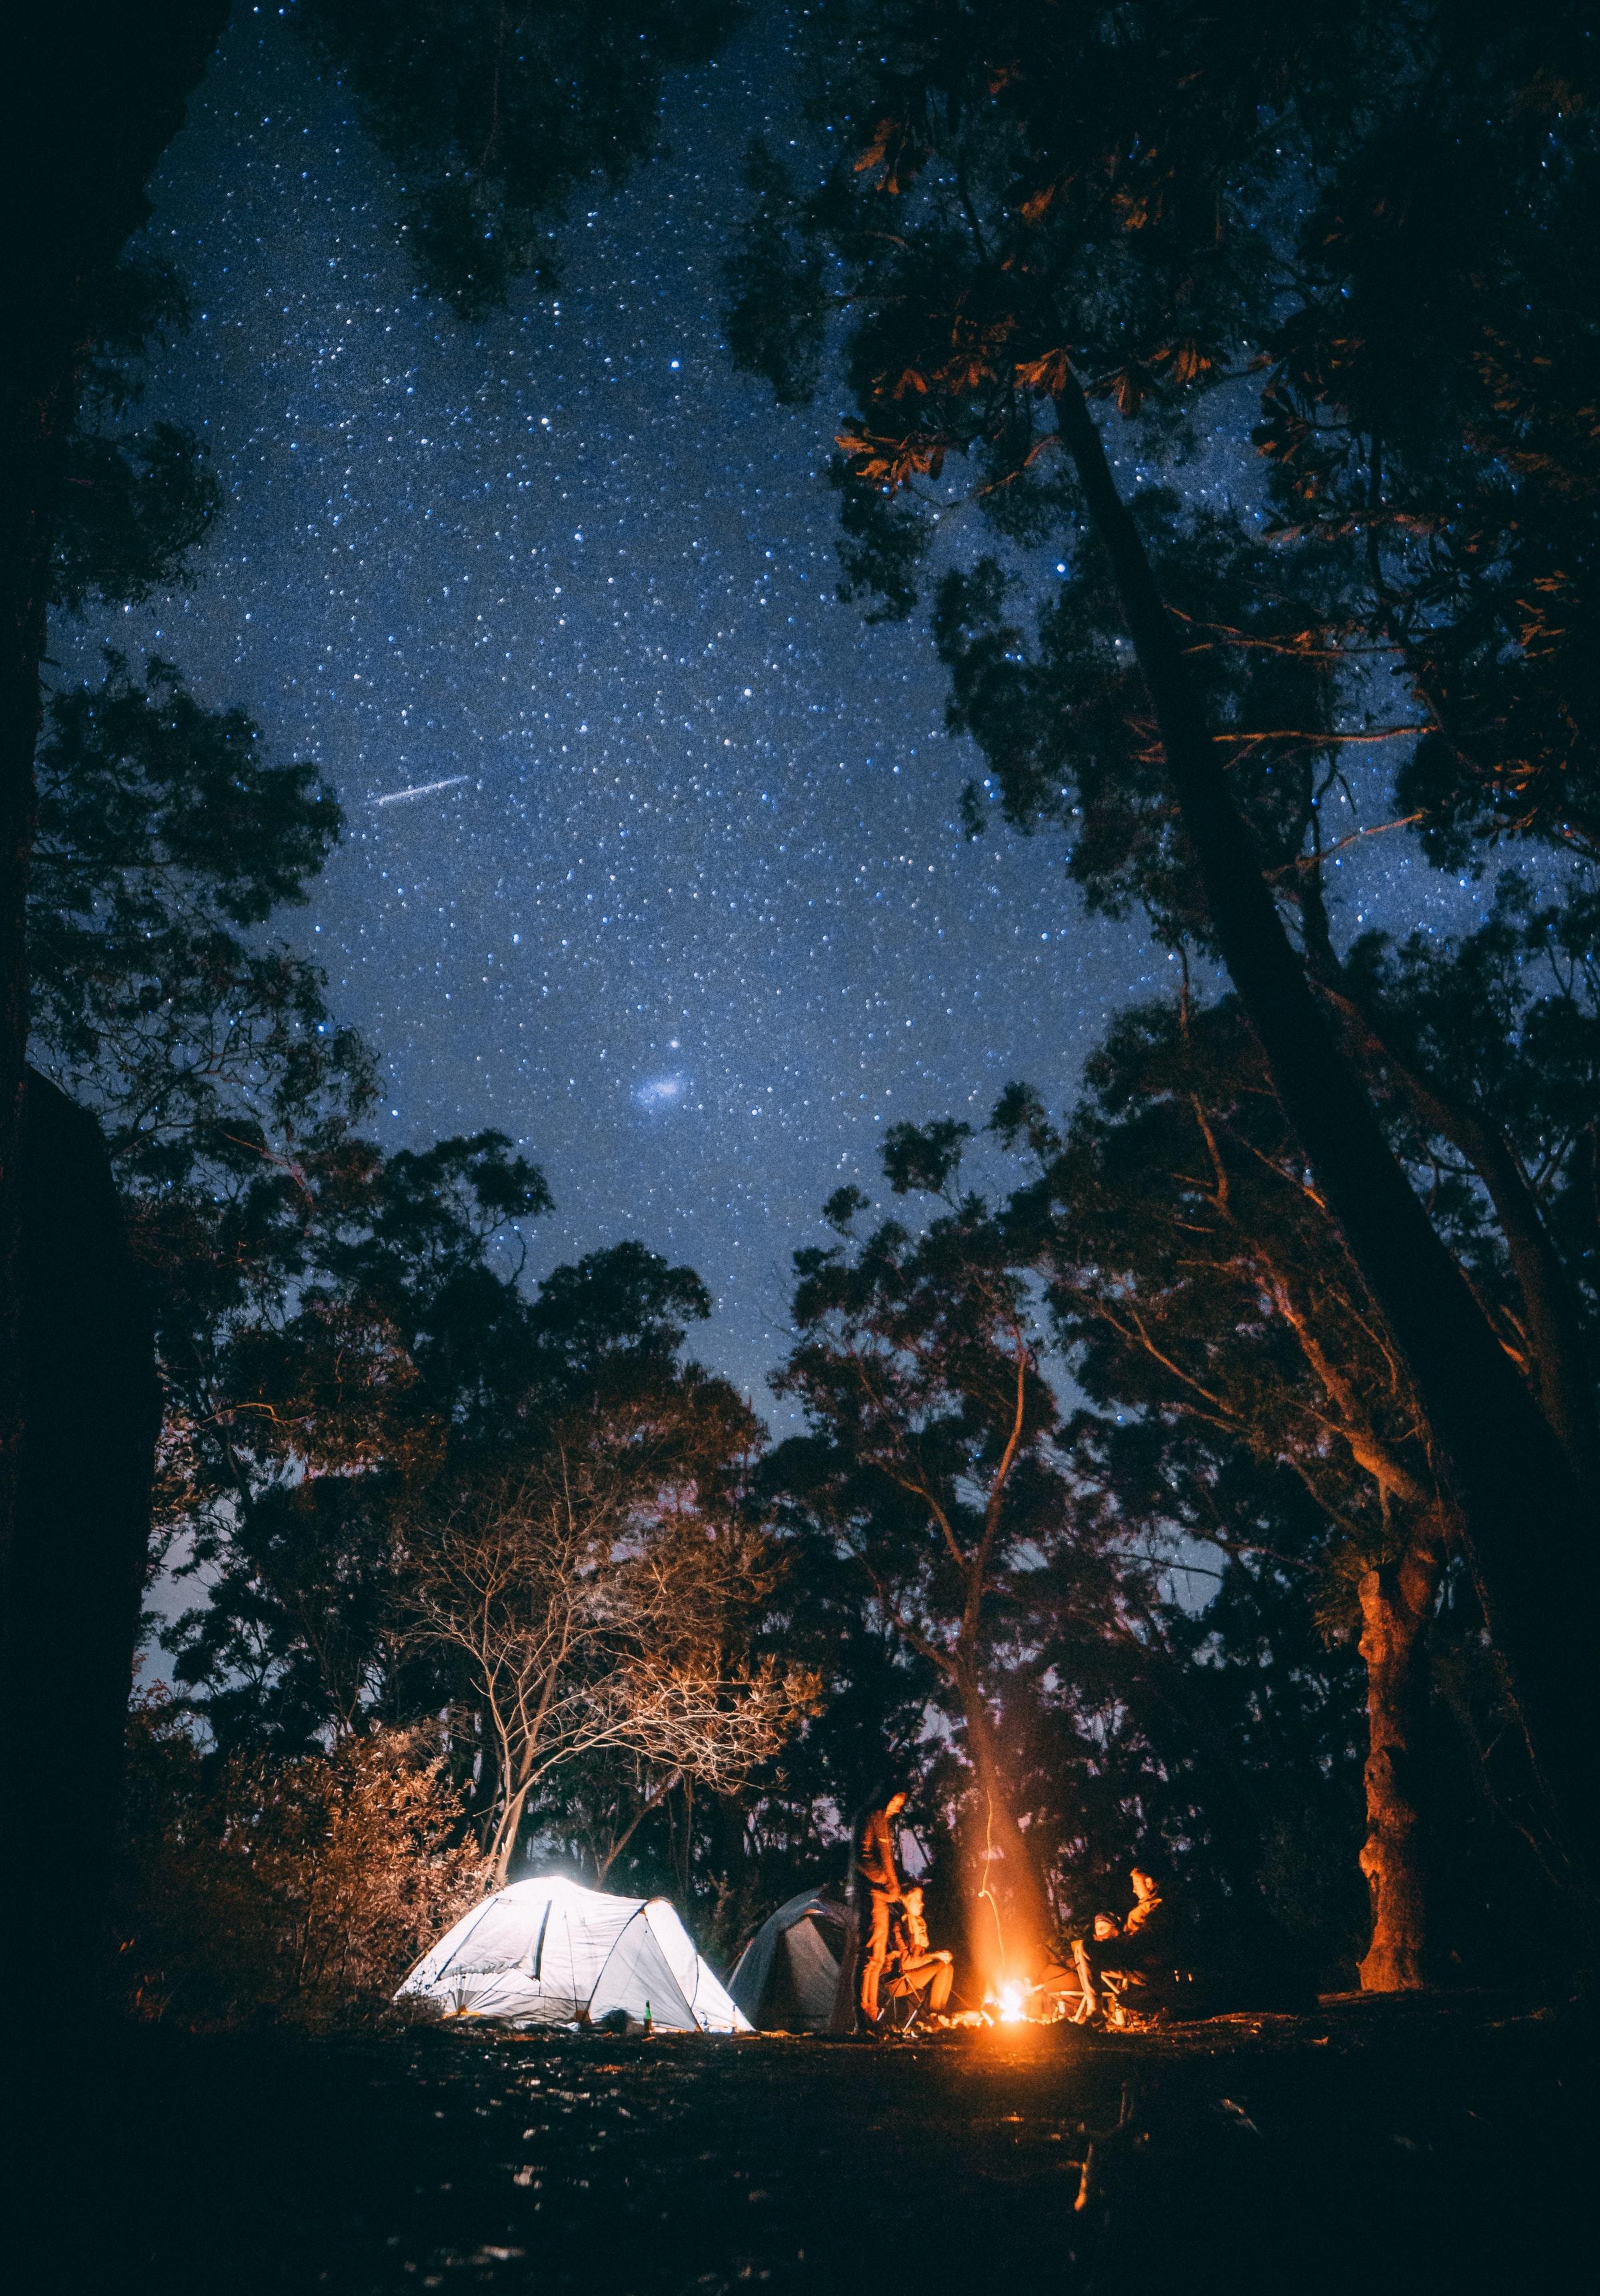 A person sitting near a bonfire surrounded by trees